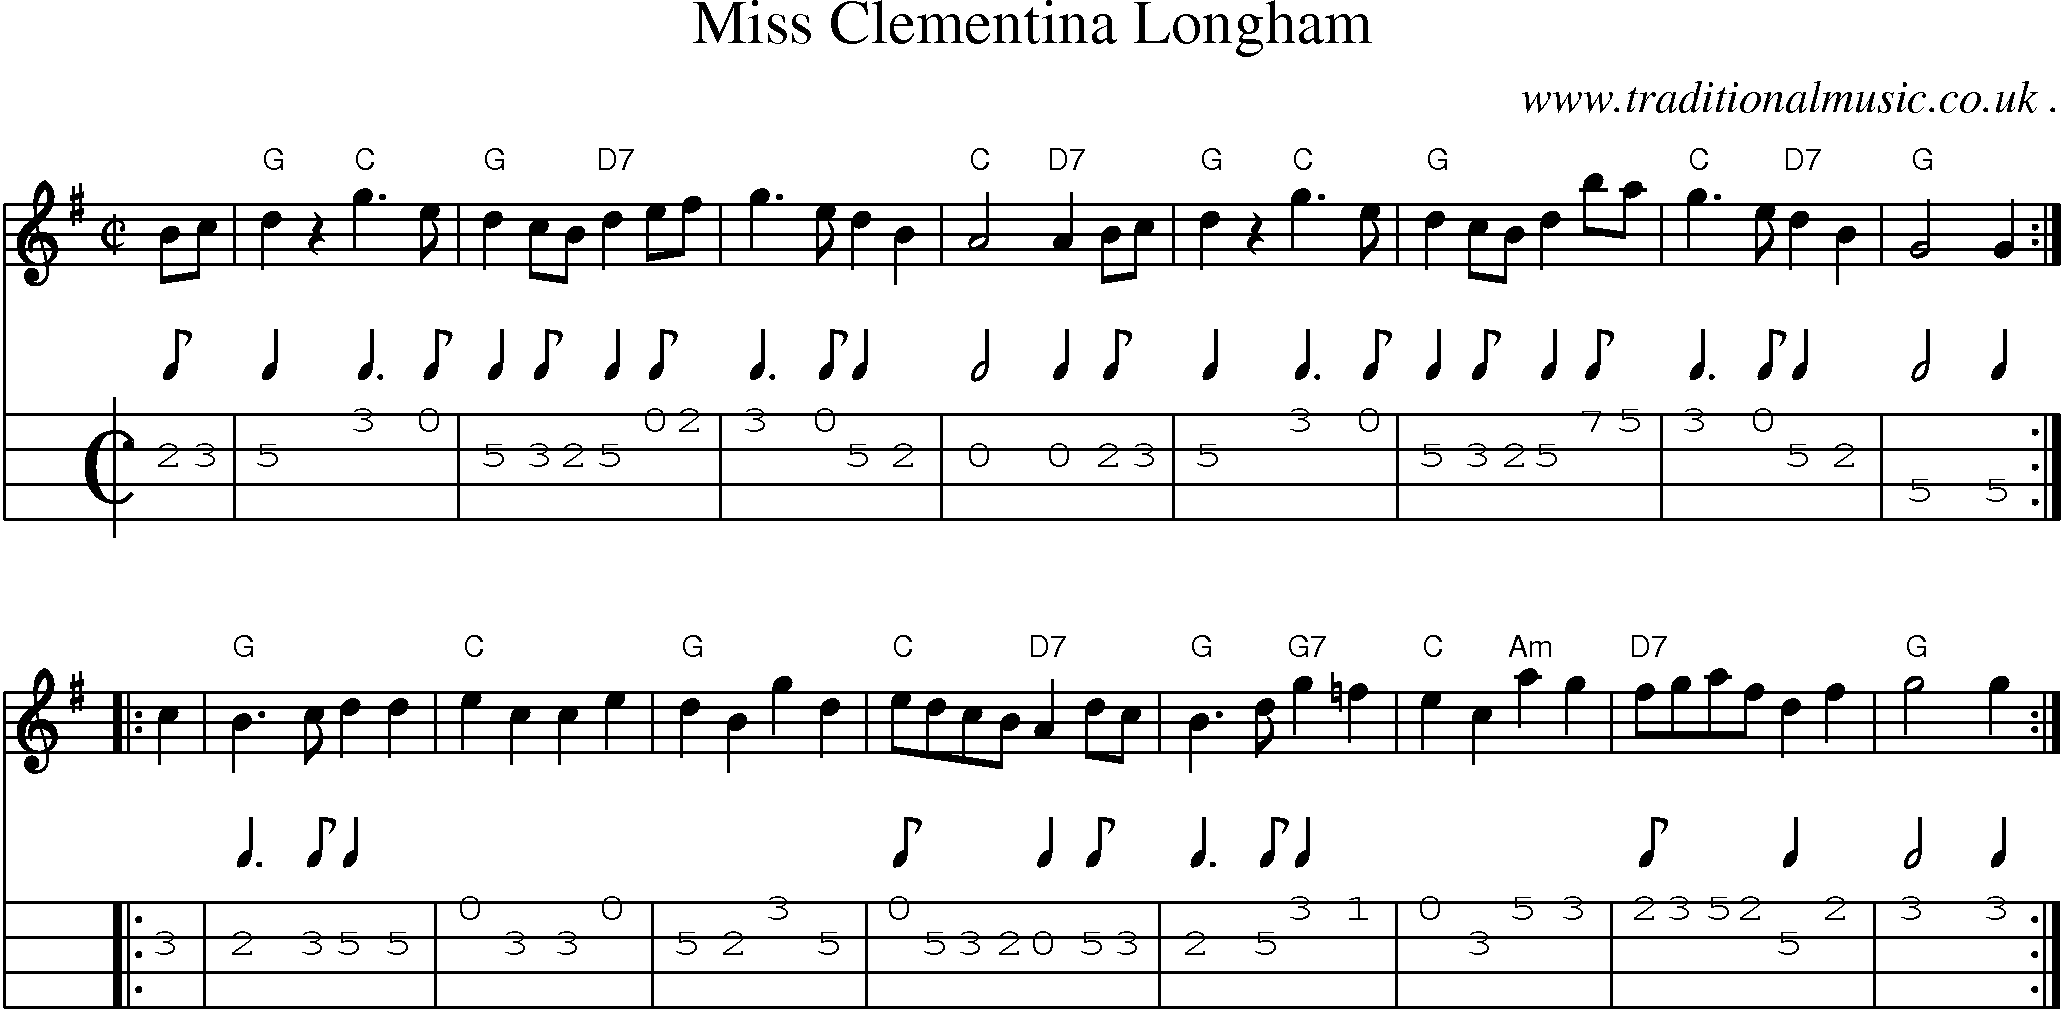 Sheet-music  score, Chords and Mandolin Tabs for Miss Clementina Longham